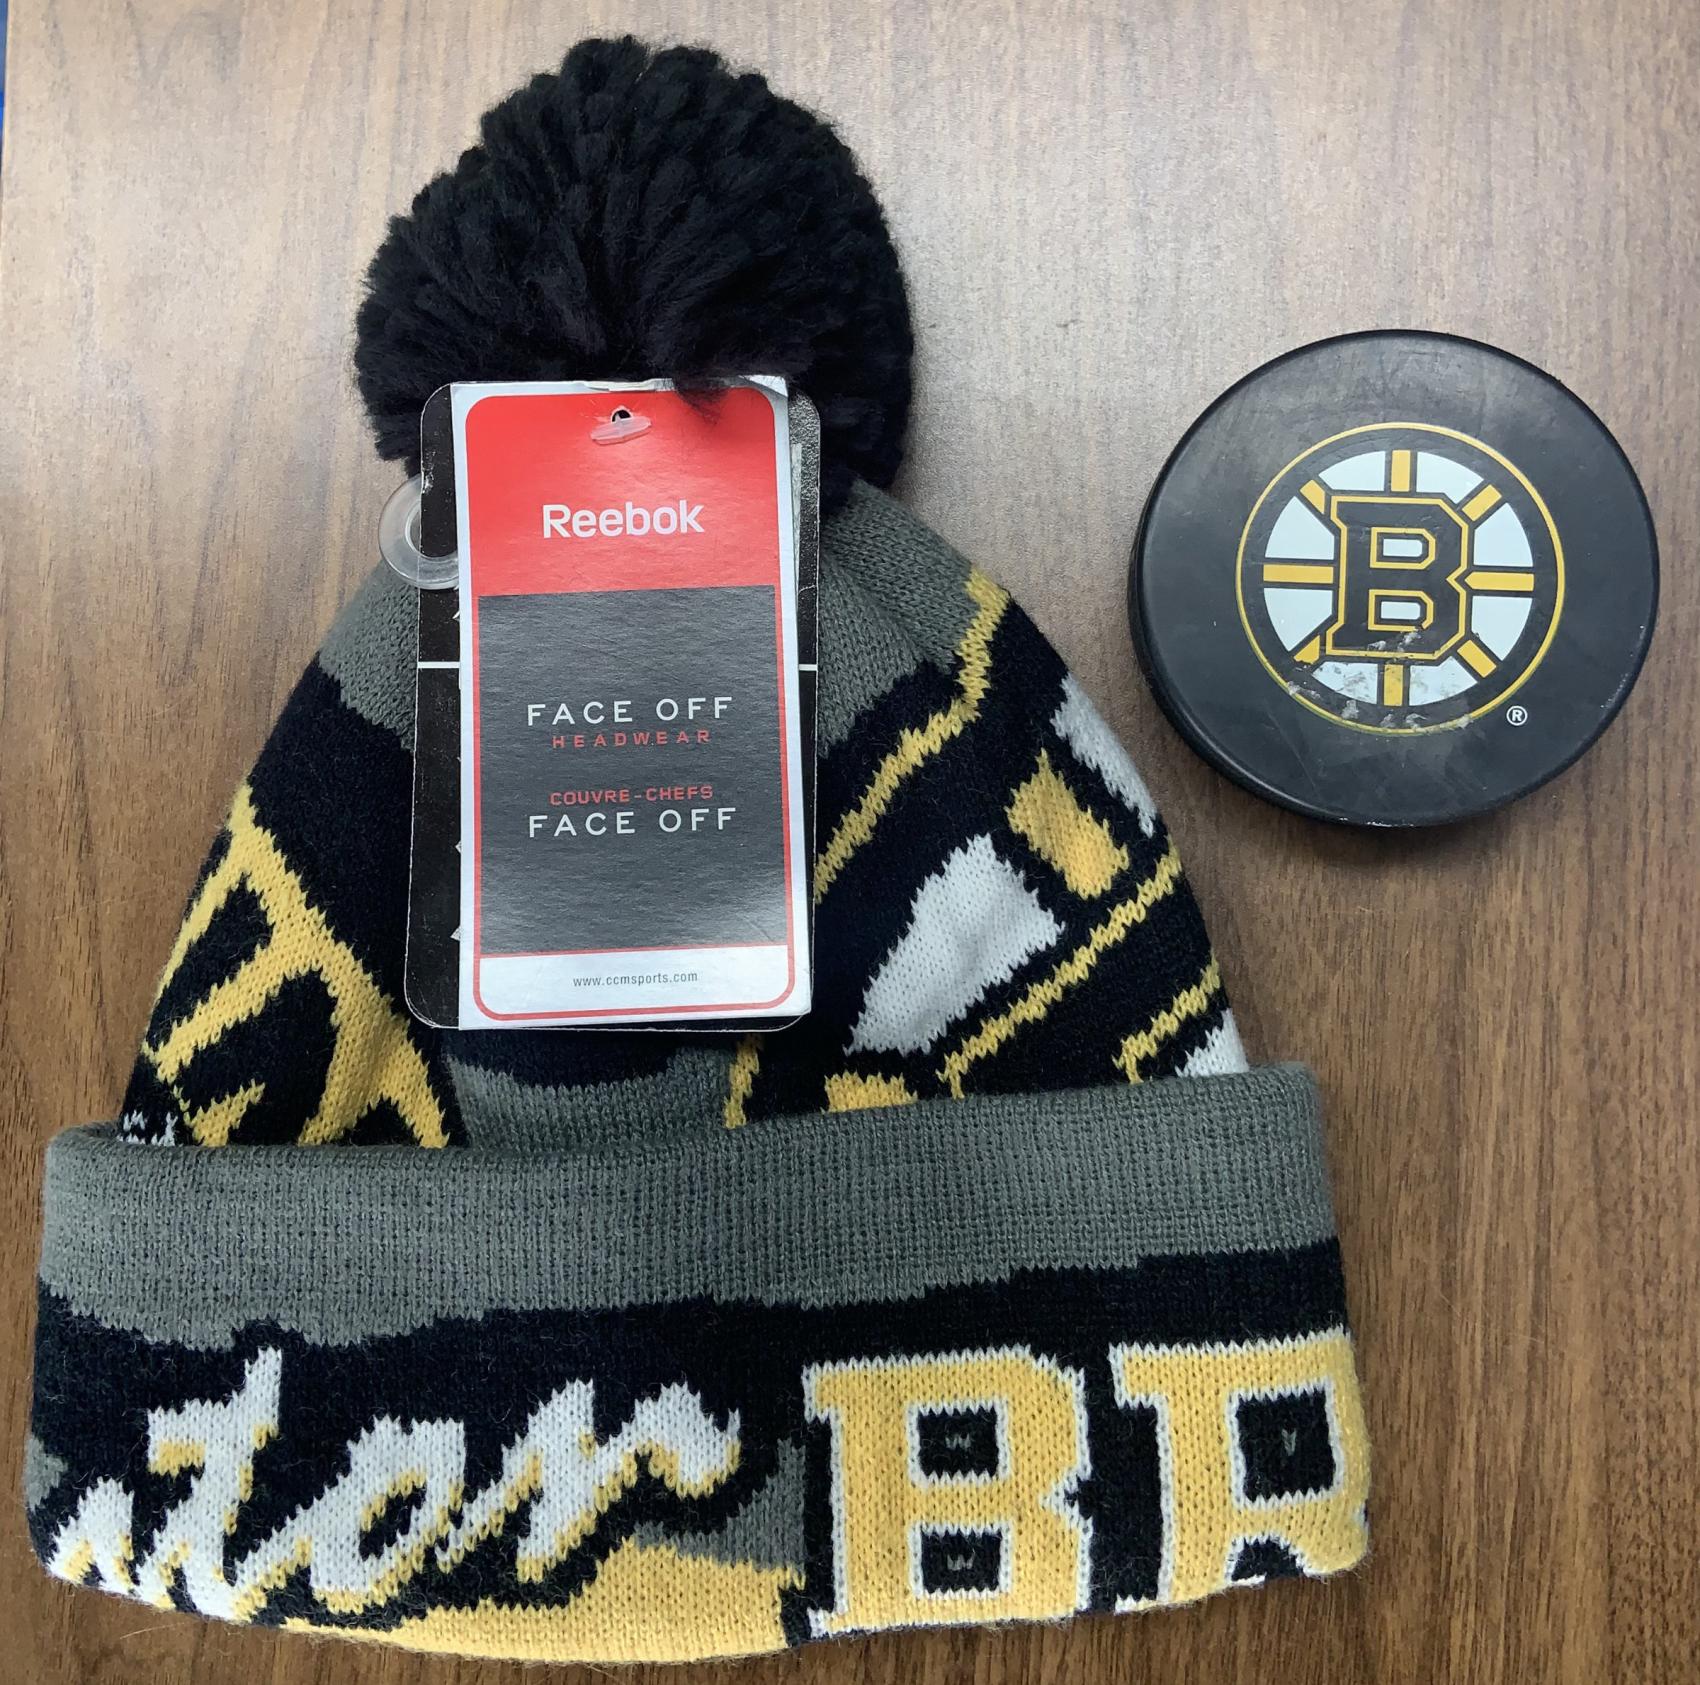 Boston Bruins tuque and hockey puck